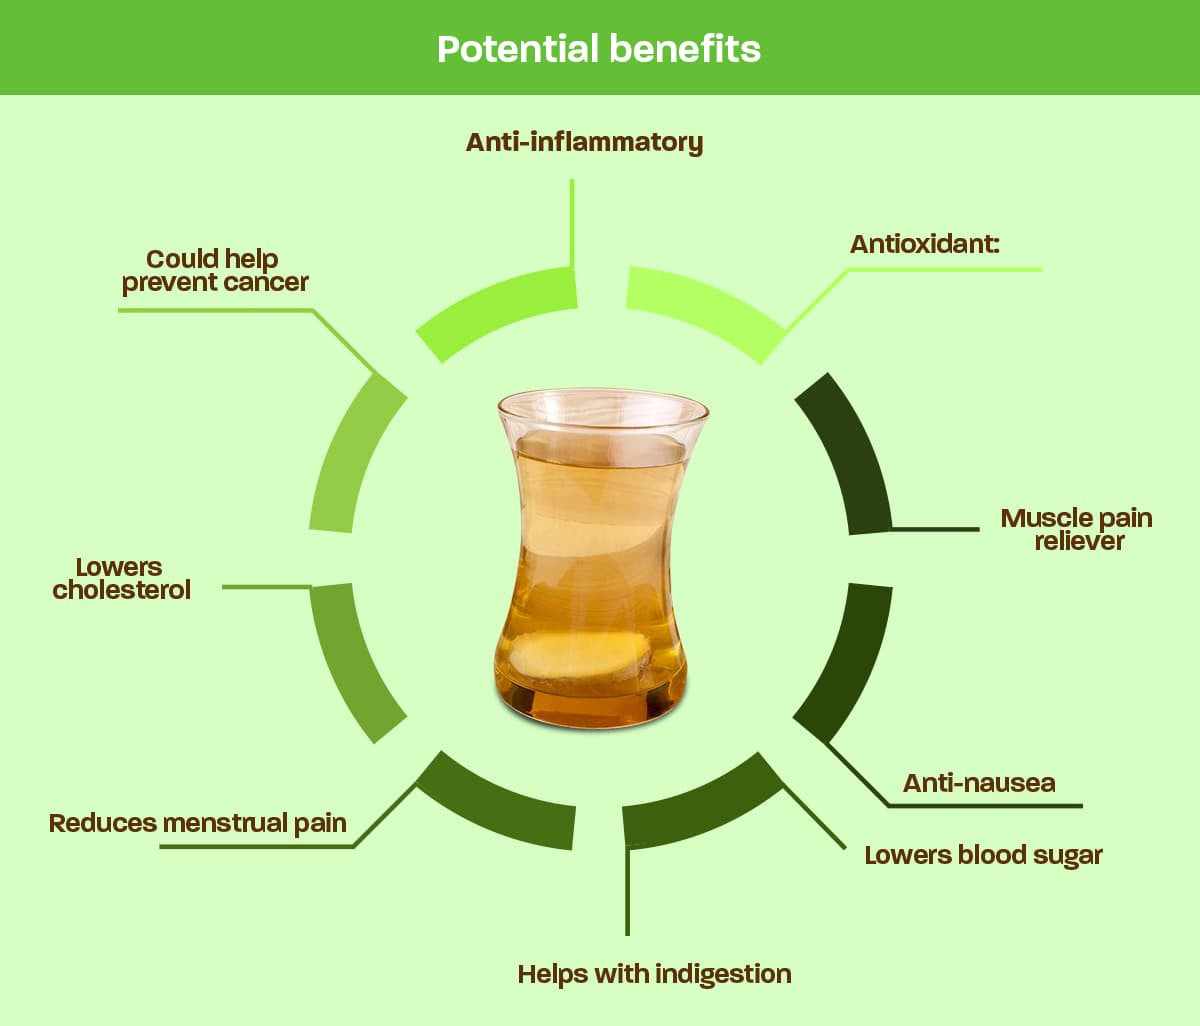 Potential benefits of drinking ginger